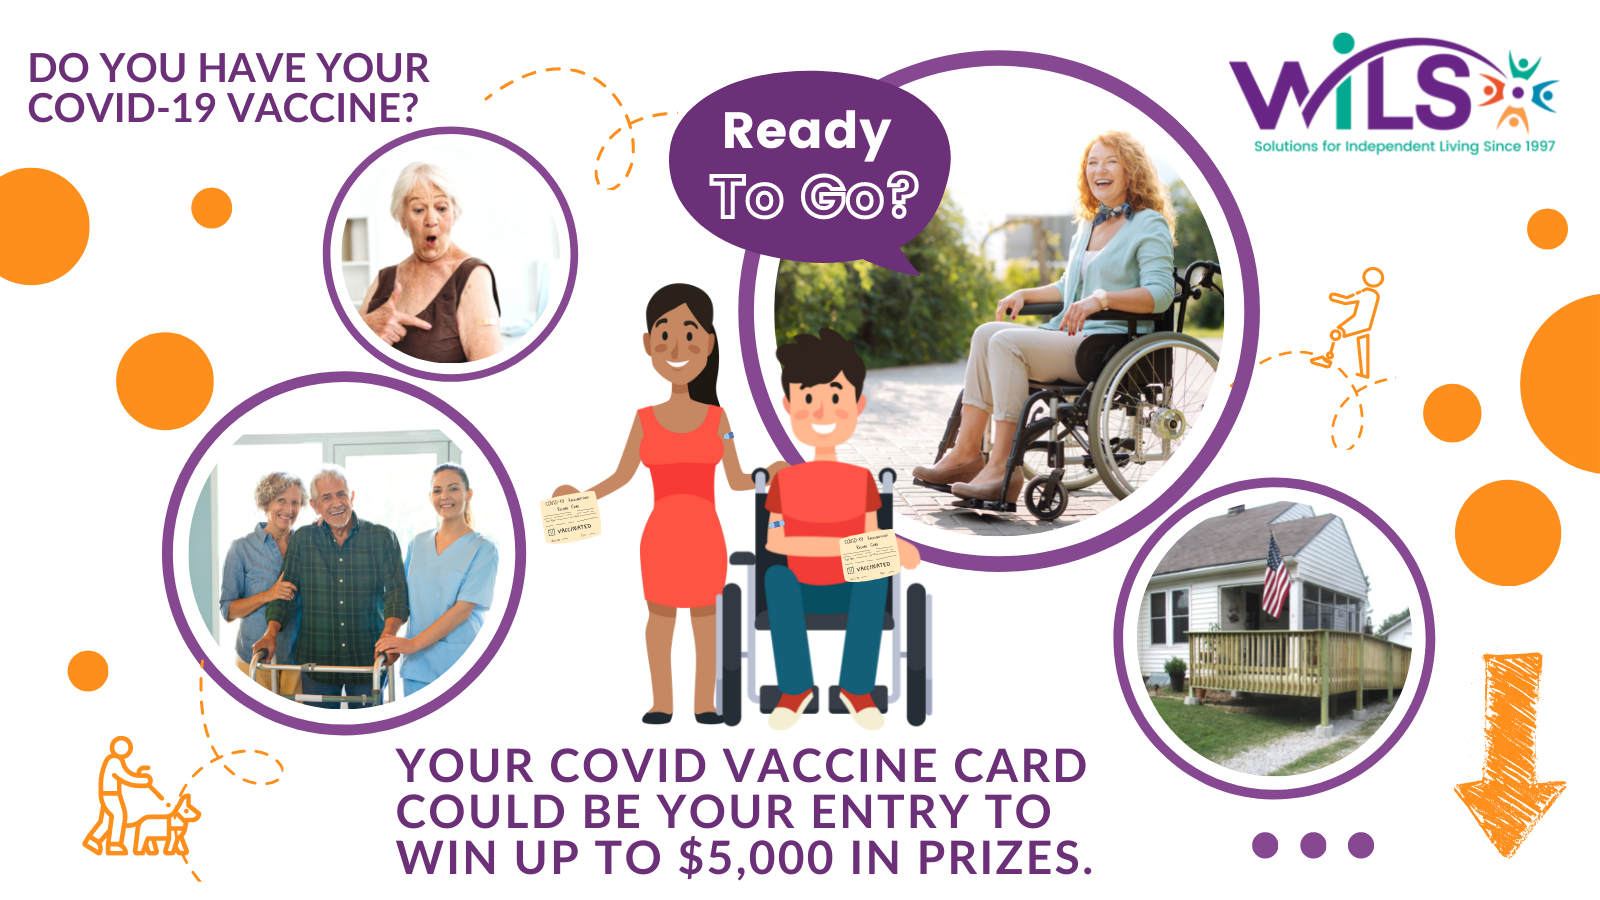 Do you have your COVID-19 Vaccine? Your COVID vaccine card could be your entry to win up to $5,000 in prizes.